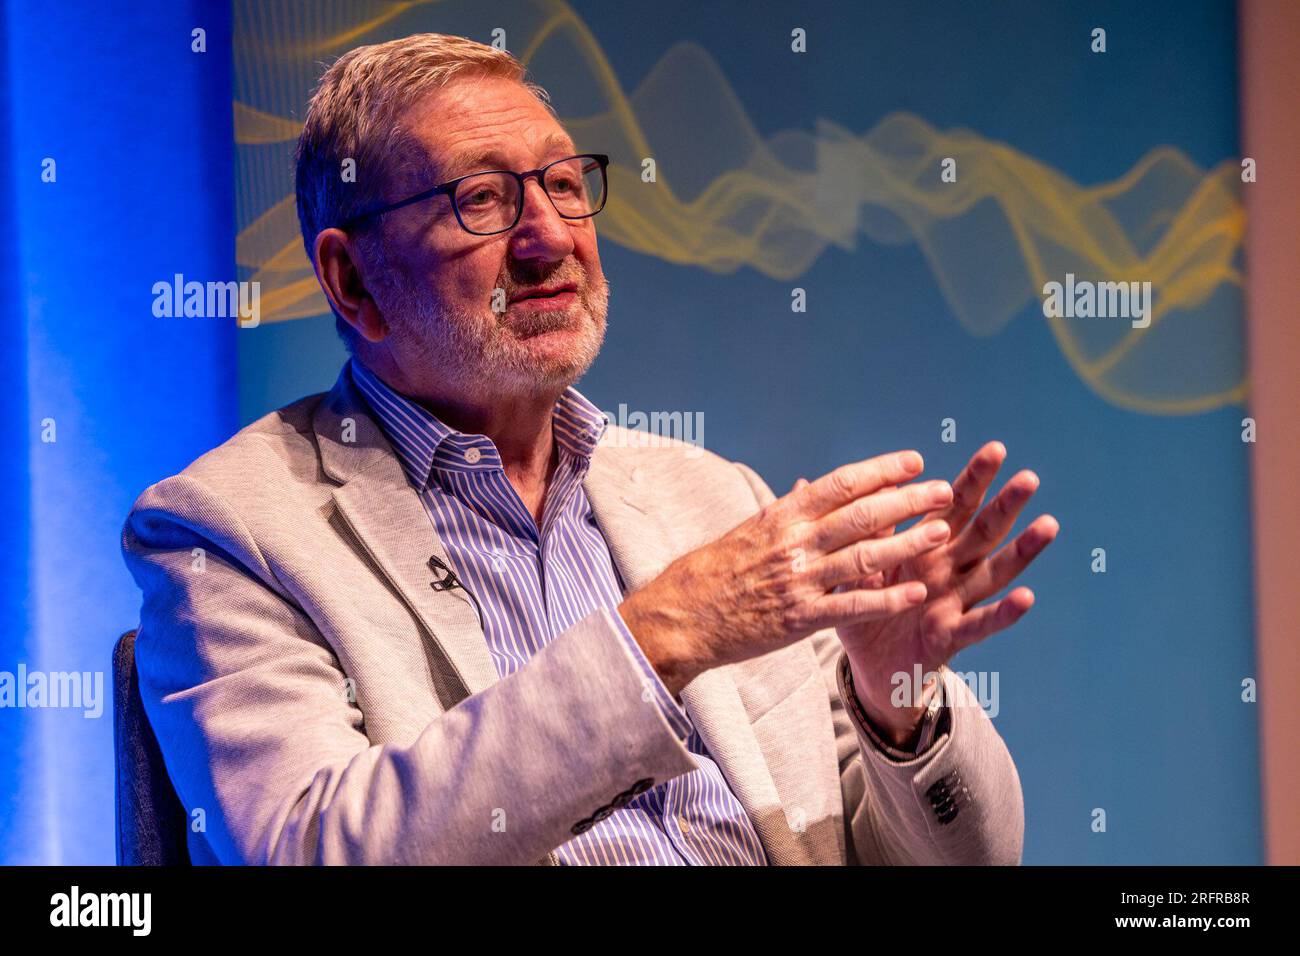 Edinburgh, United Kingdom. 05 August, 2023 Pictured: Len McCluskey. Former Labour leader Jeremy Corbyn MP and renowned trade unionist Len McCluskey are interviewed by LBC presenter Iain Dale at the Edinburgh Fringe. During the interview McCluskey accused Keir Starmer of reneging on an agreement to retain Corbyn in the Labour Party. Jeremy Corbyn was quizzed if he will stand as an independent candidate in his constituency and responded by saying ‘watch this space’. Credit: Rich Dyson/Alamy Live News Stock Photo